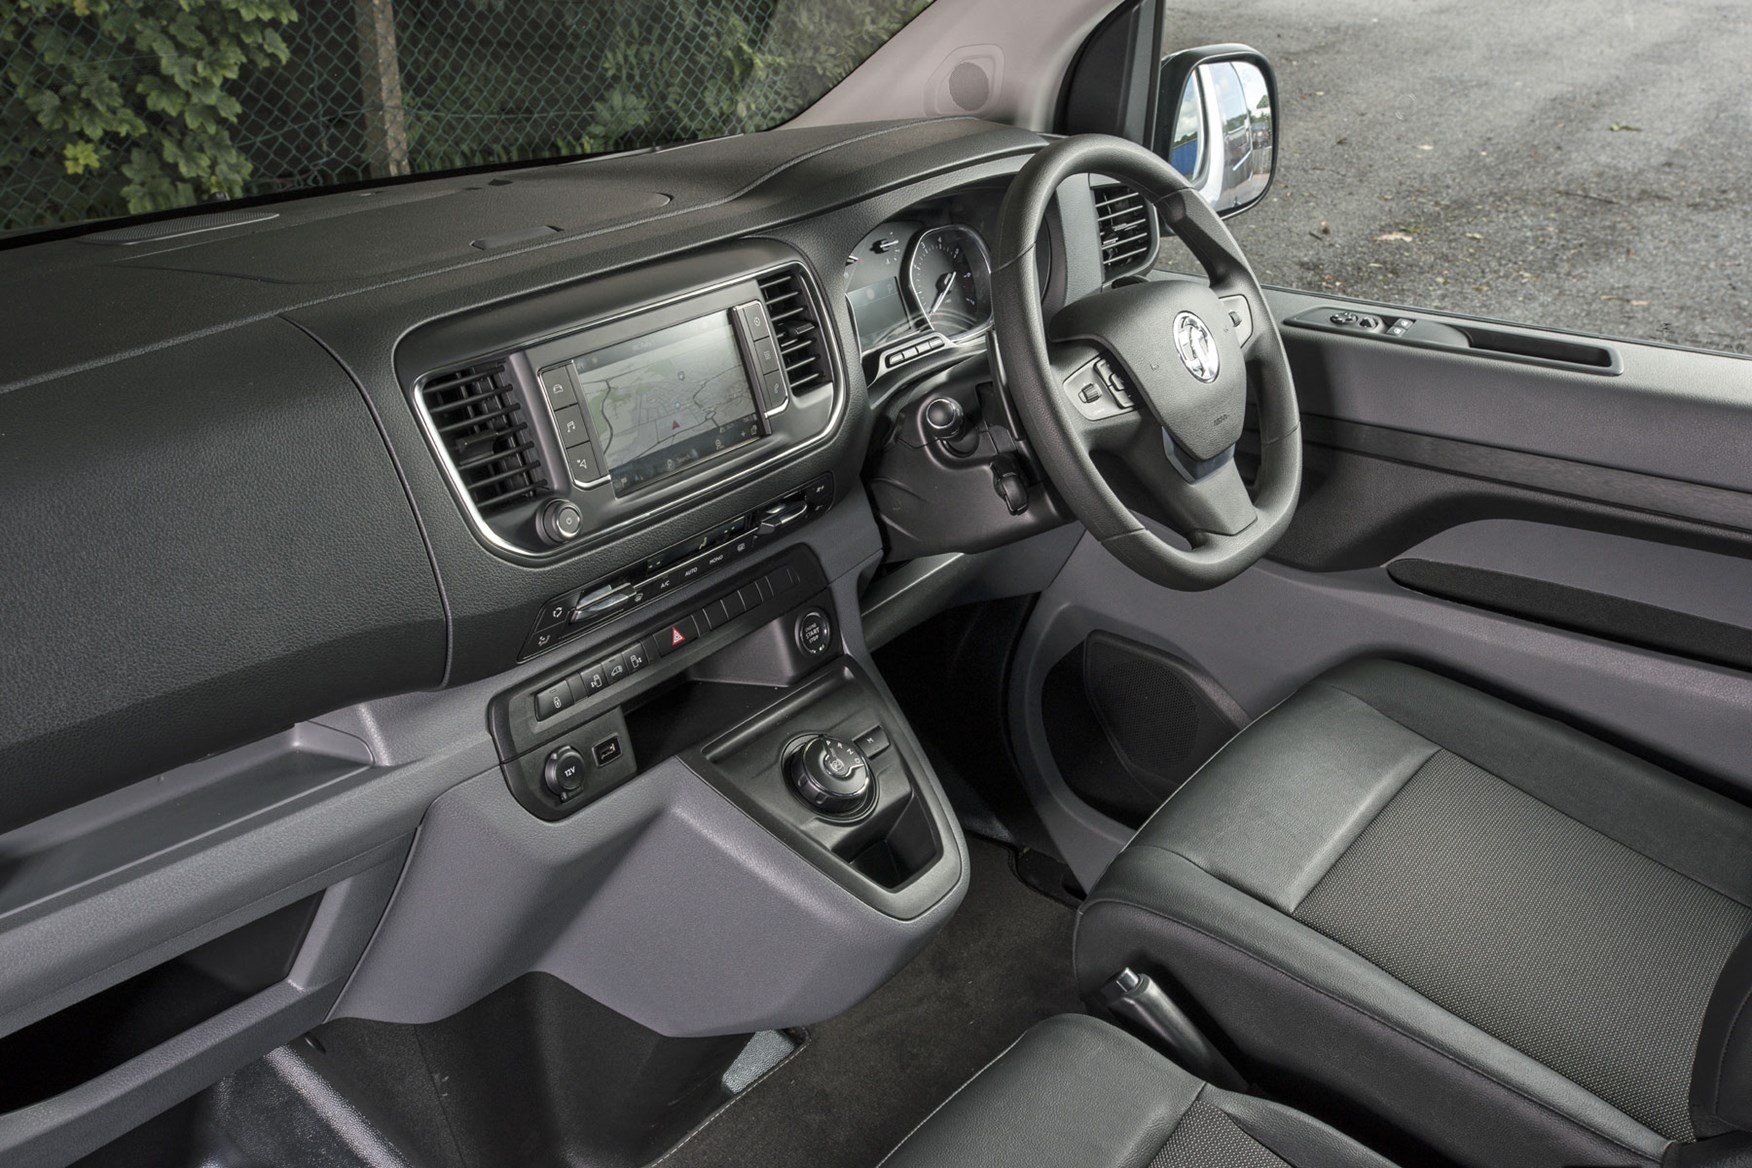 Vauxhall Vivaro review - right-hand drive cab interior with eight-speed automatic gearbox